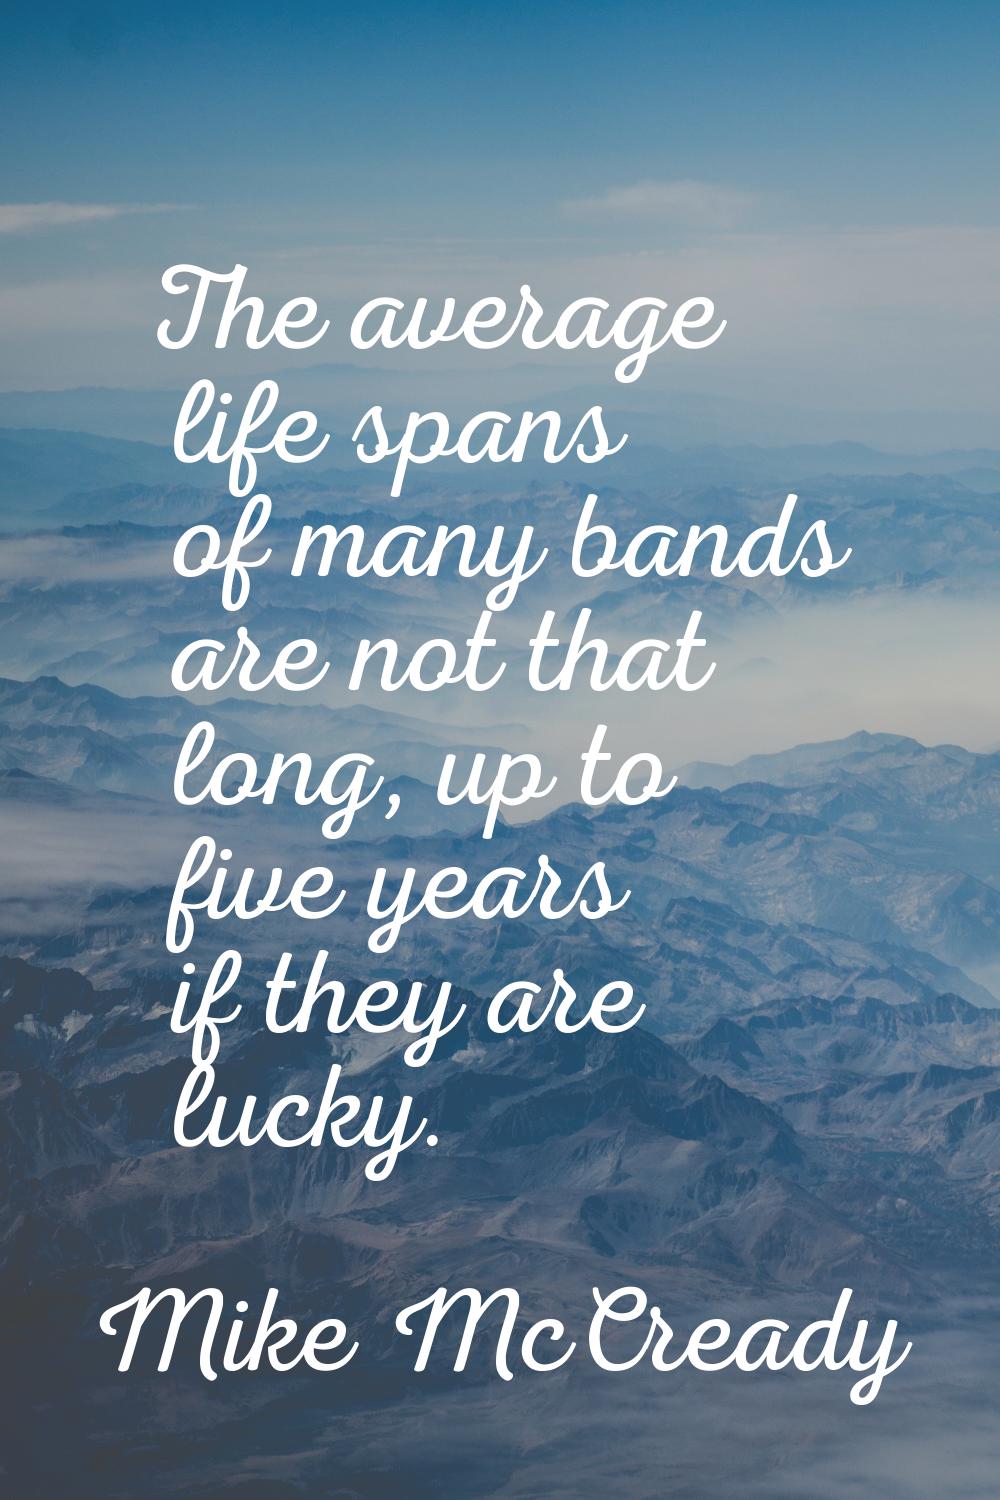 The average life spans of many bands are not that long, up to five years if they are lucky.